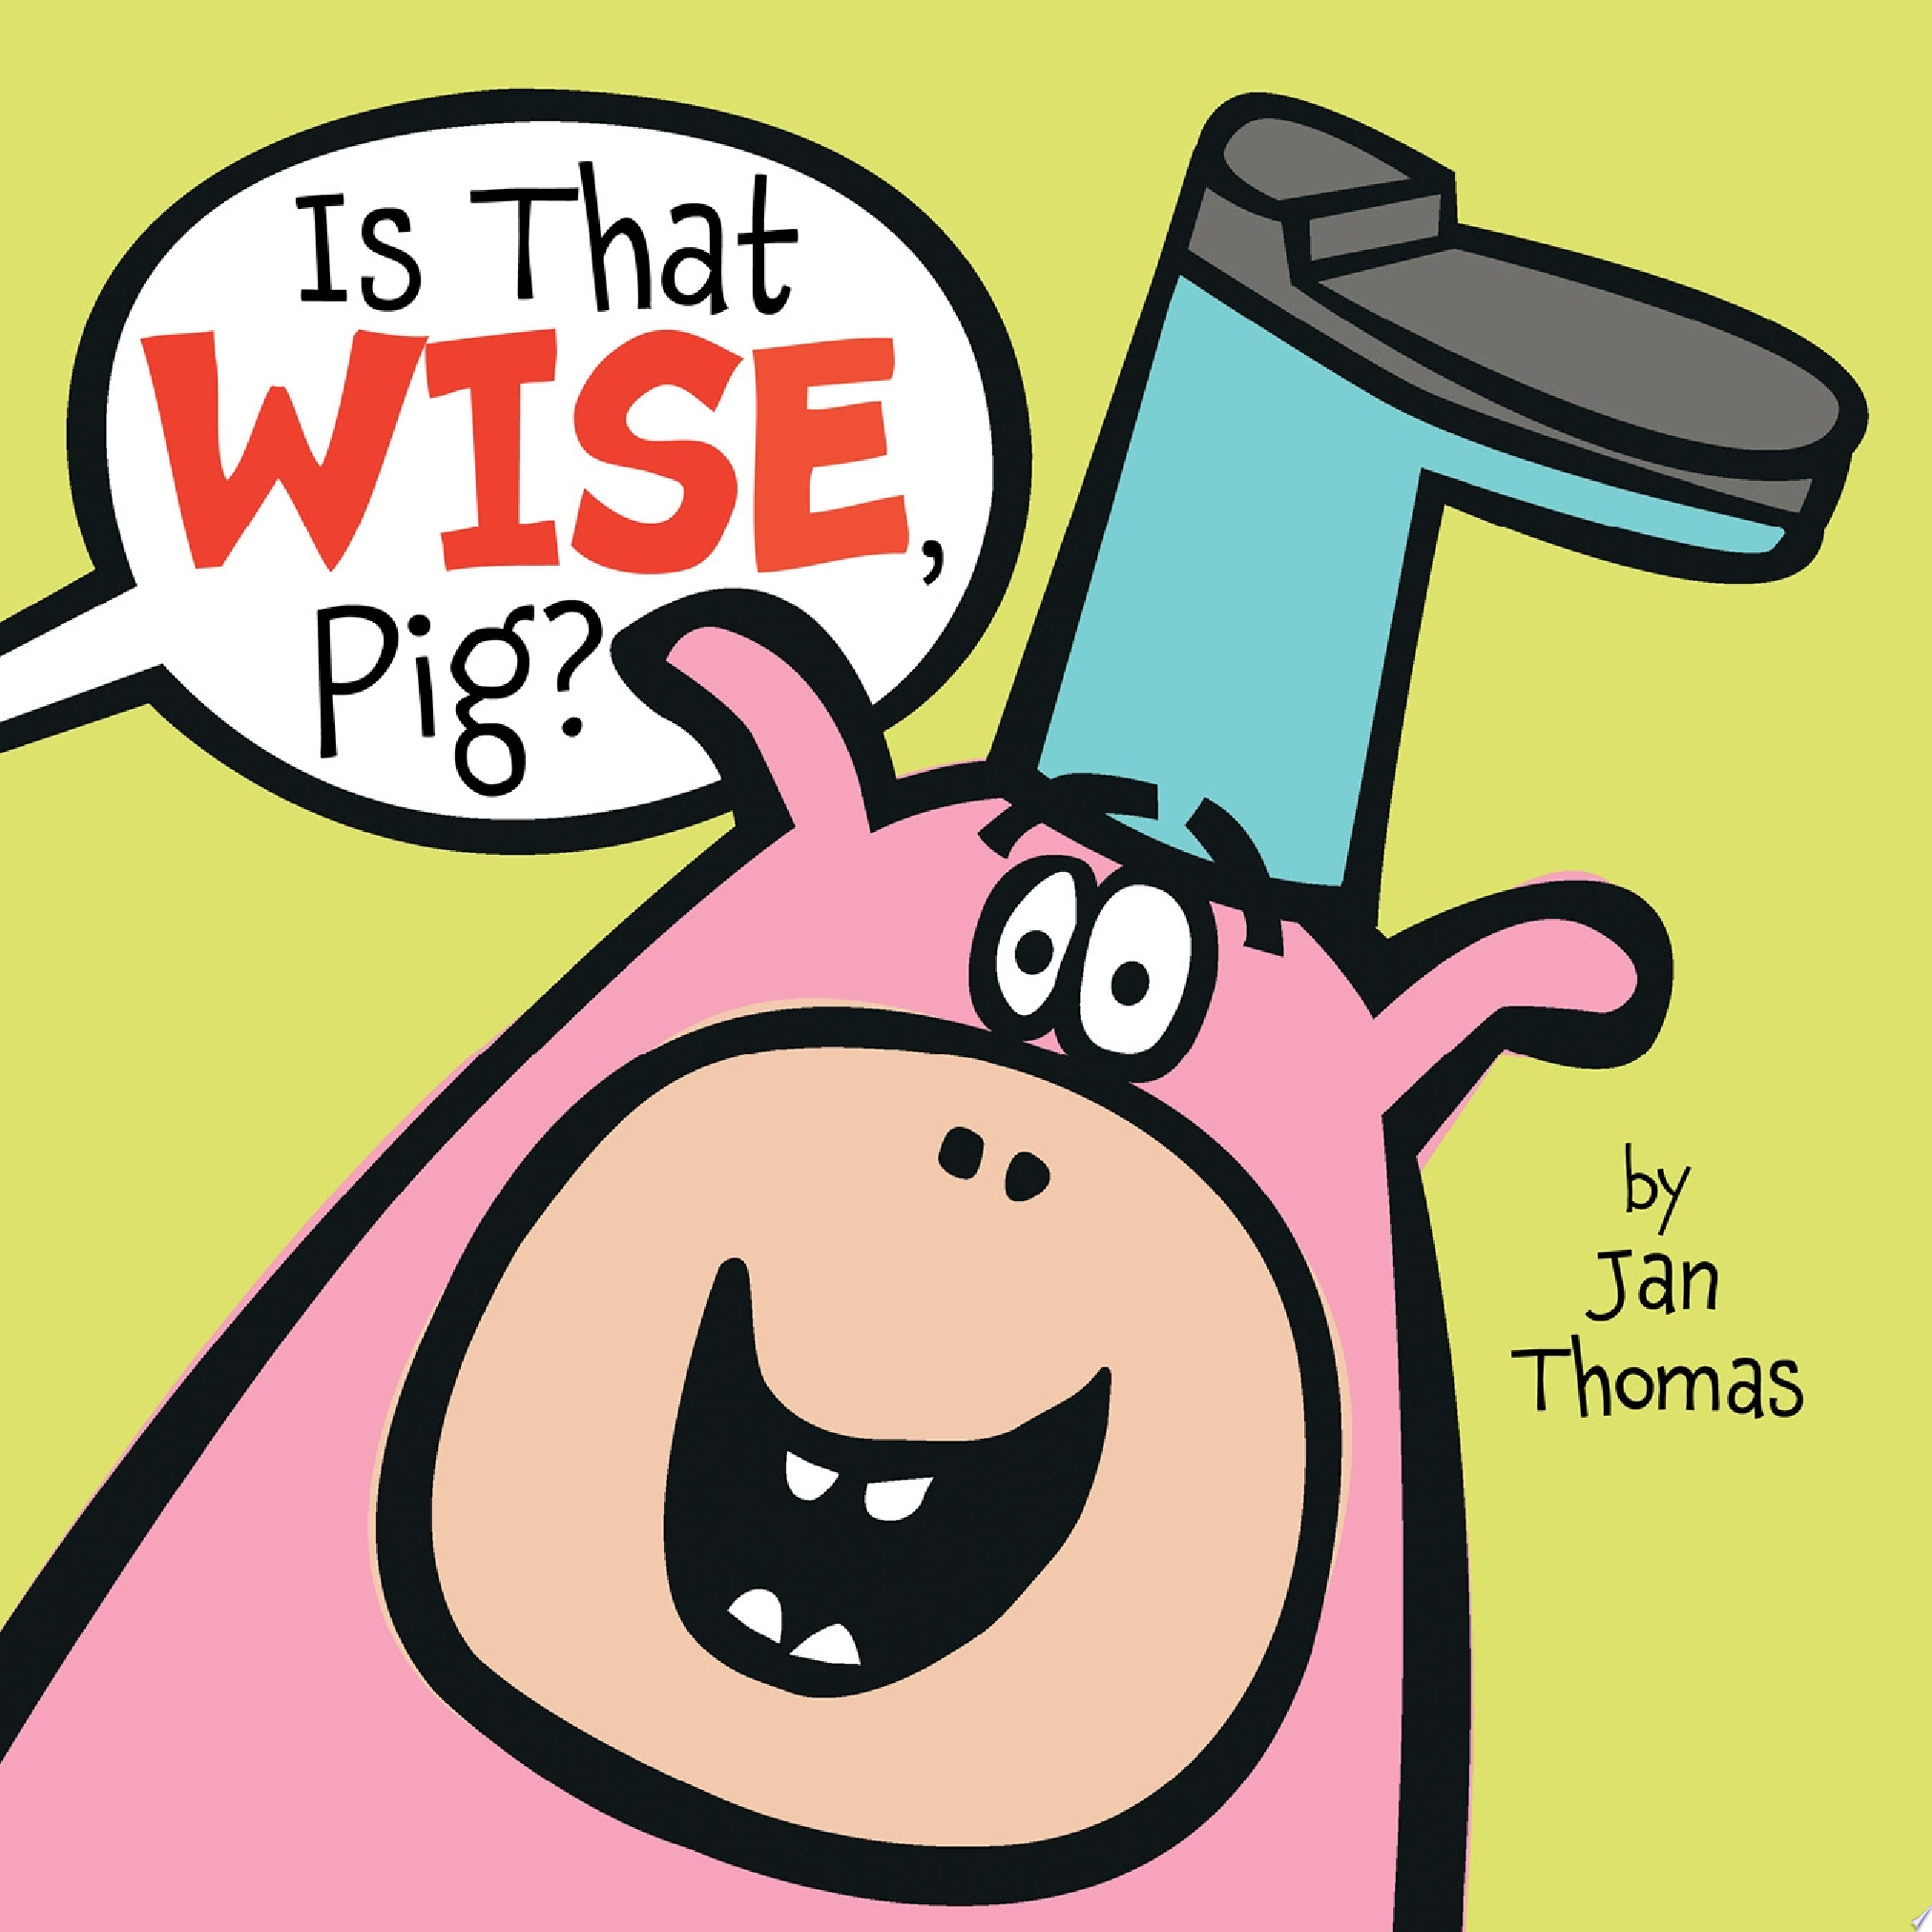 Image for "Is That Wise, Pig?"